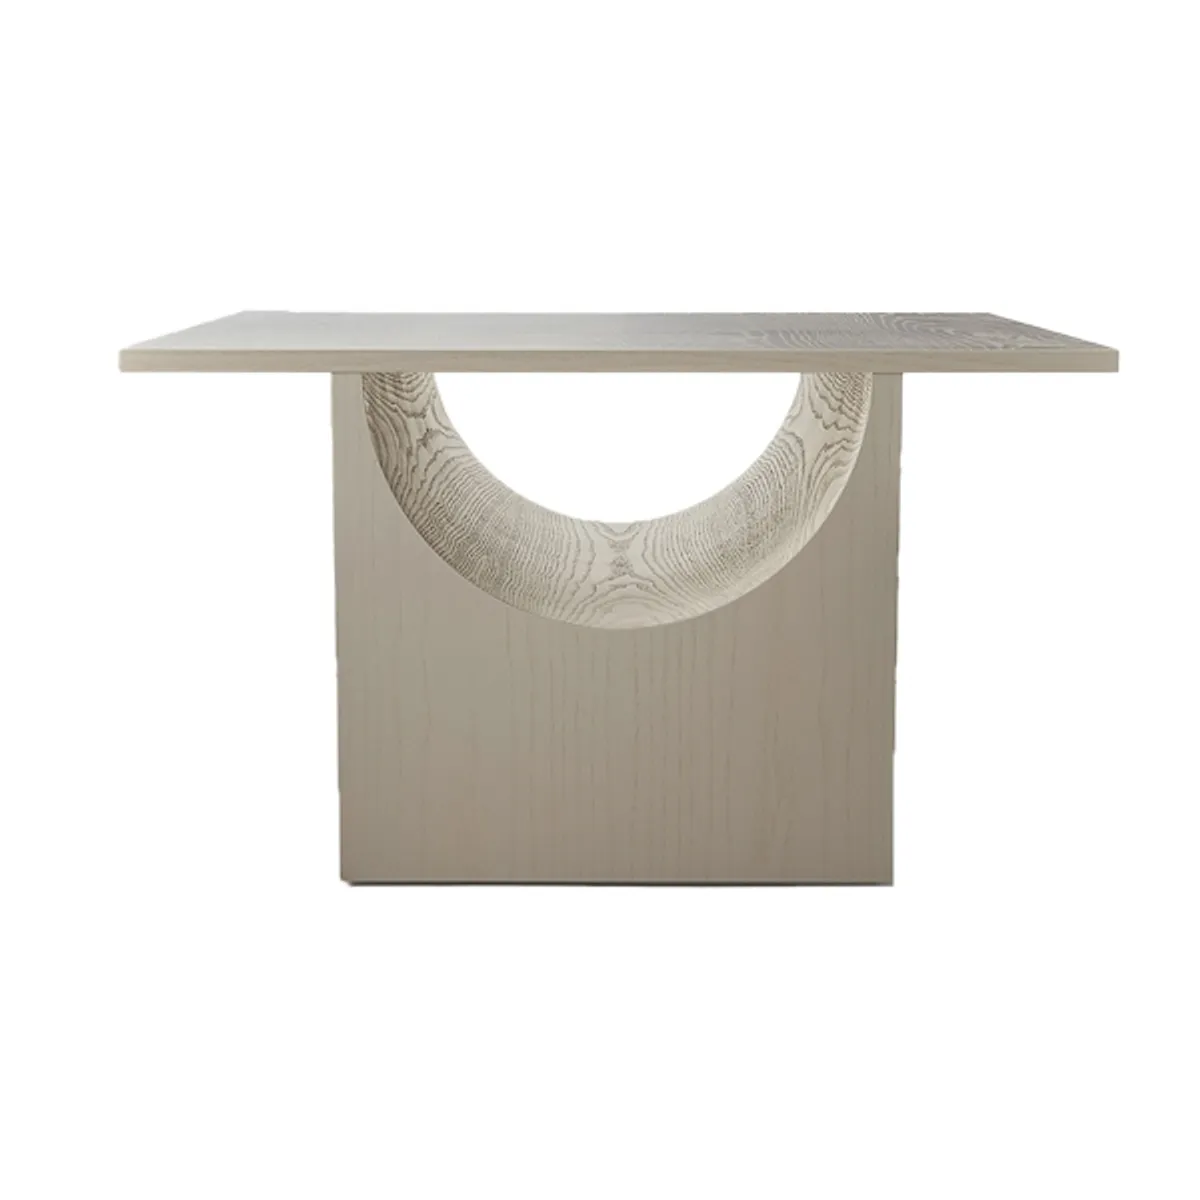 Vestige square coffee table Inside Out Contracts6